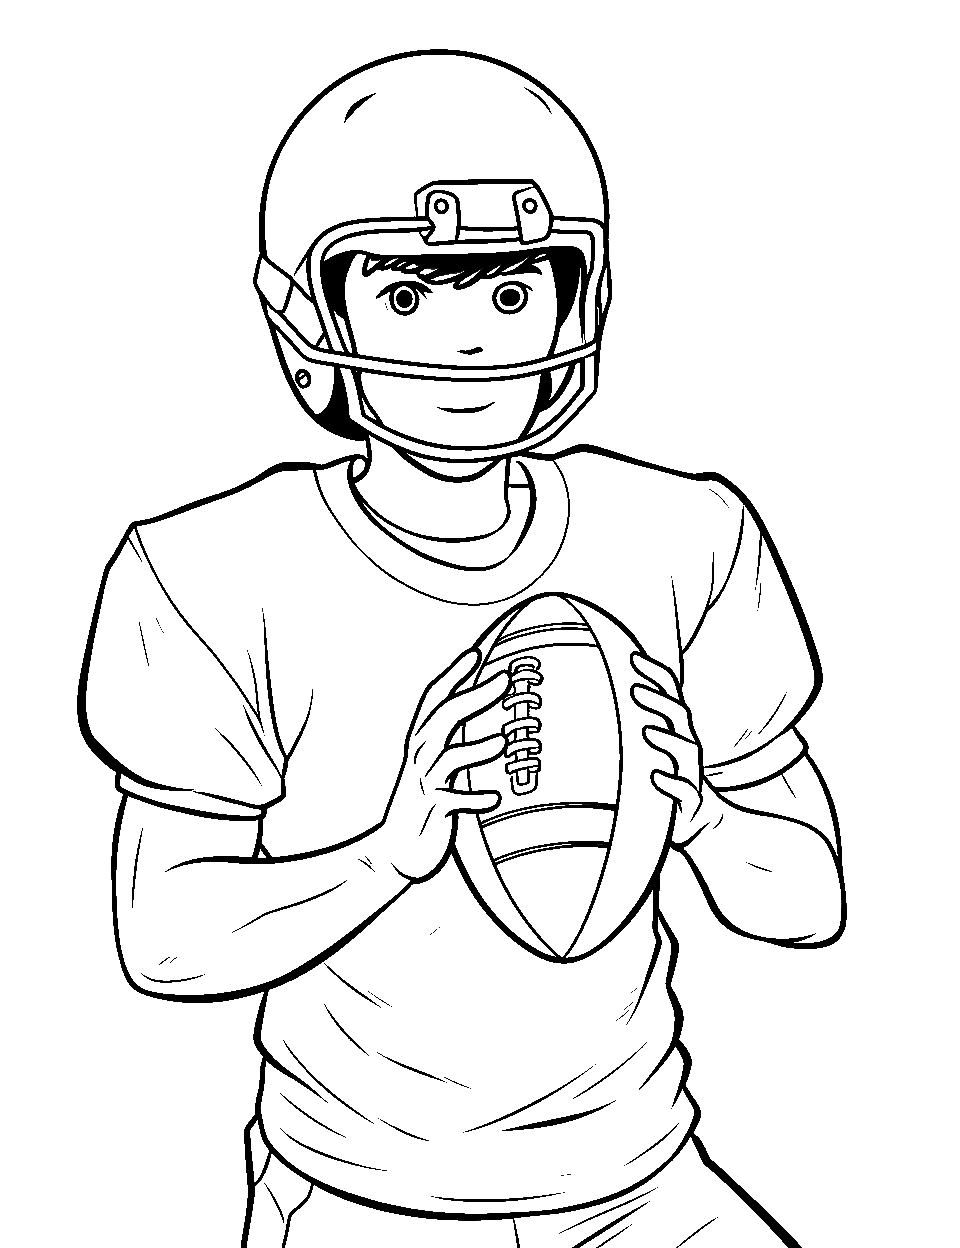 Ready to Snap Coloring Page - A center holding the football, ready to snap it.